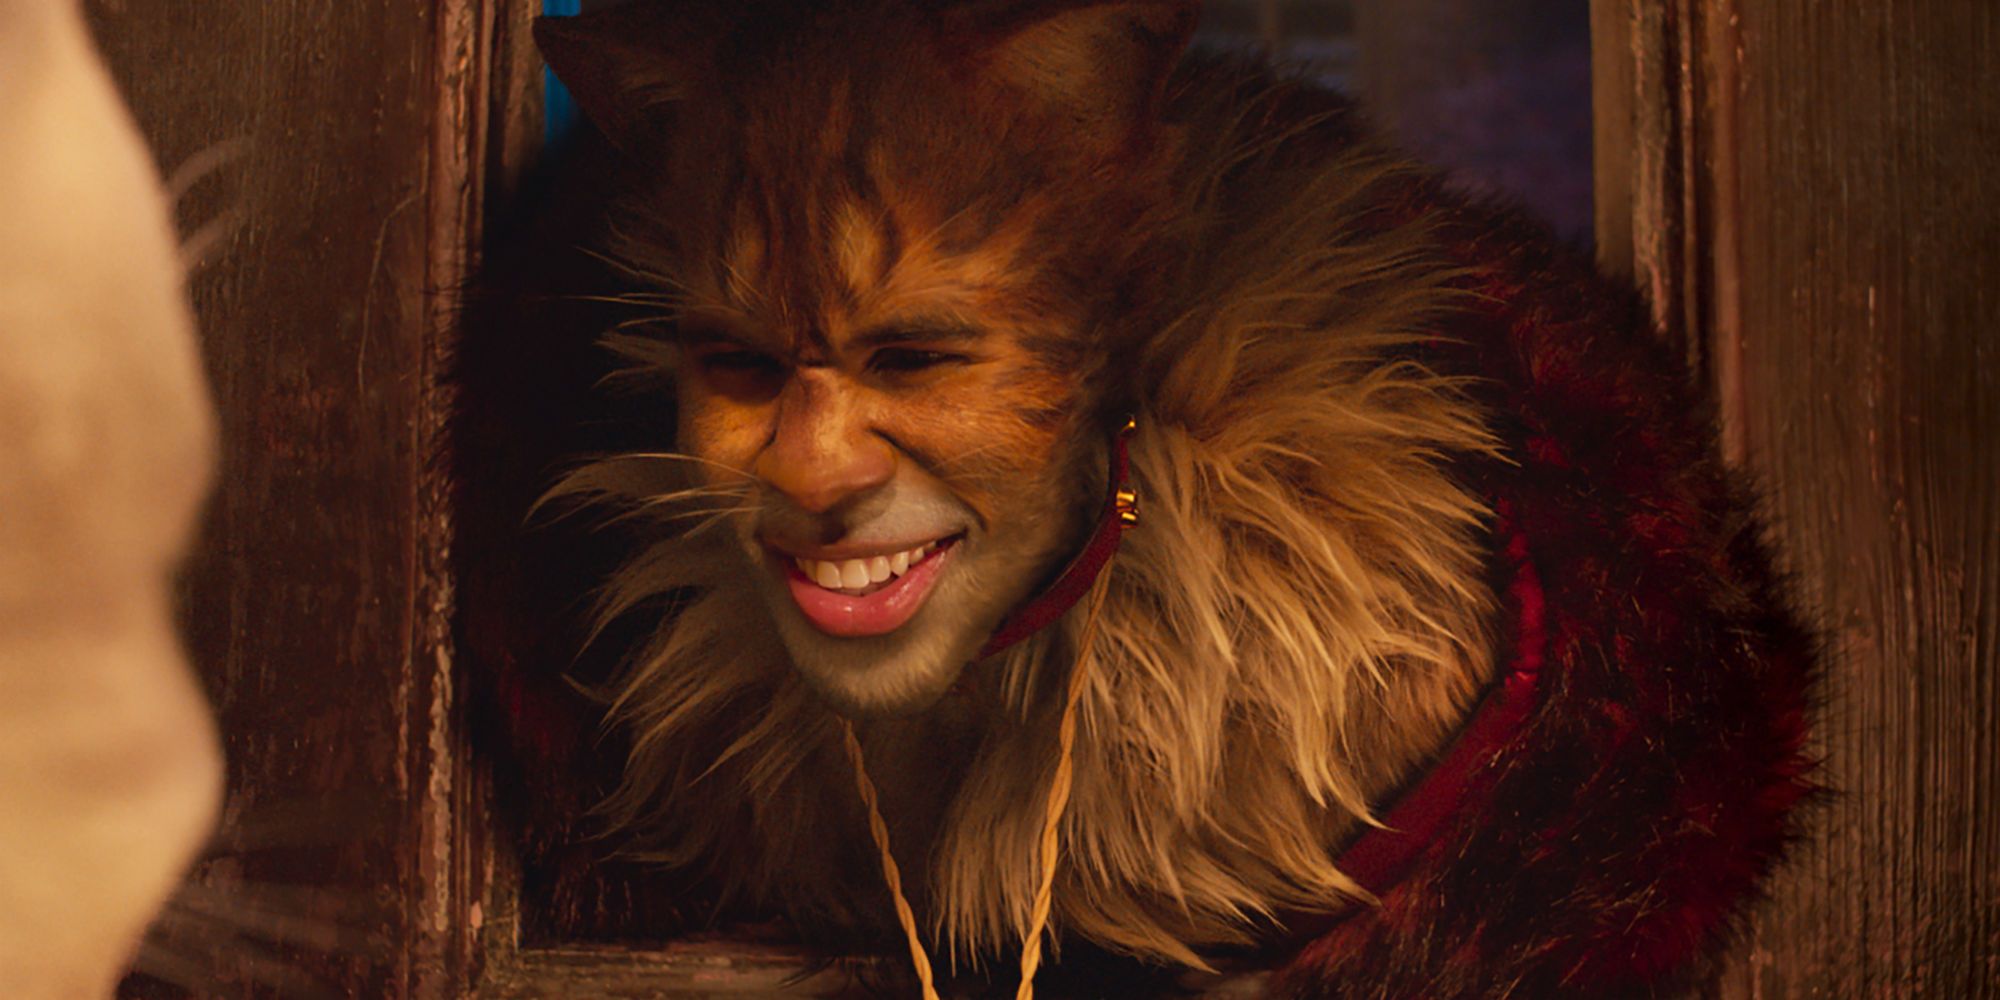 Jason Derulo Thought Cats Would Change The World